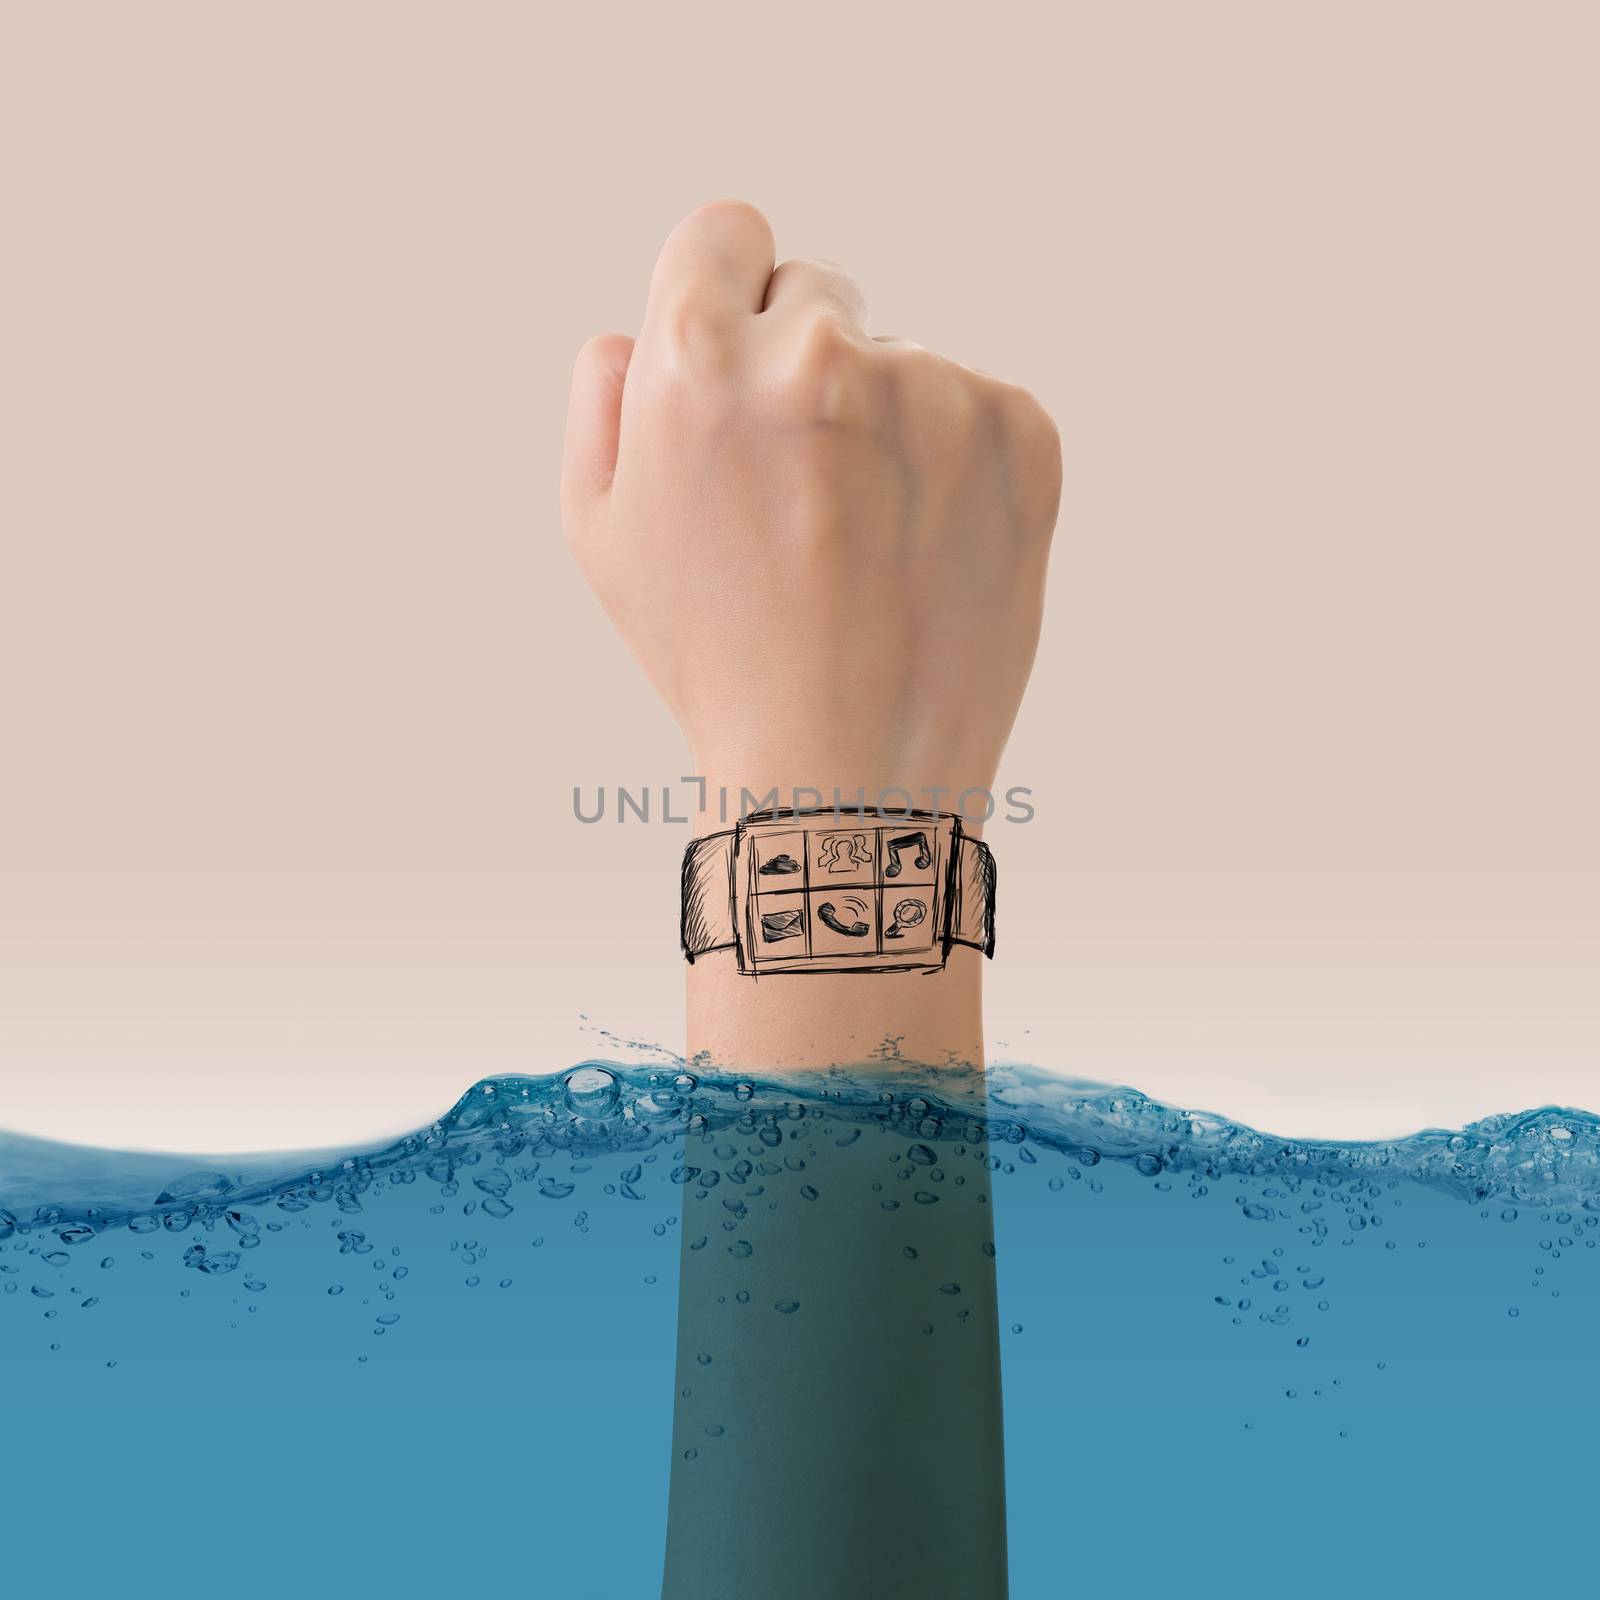 Smart watch concept of waterproof, growth, new, come out etc.